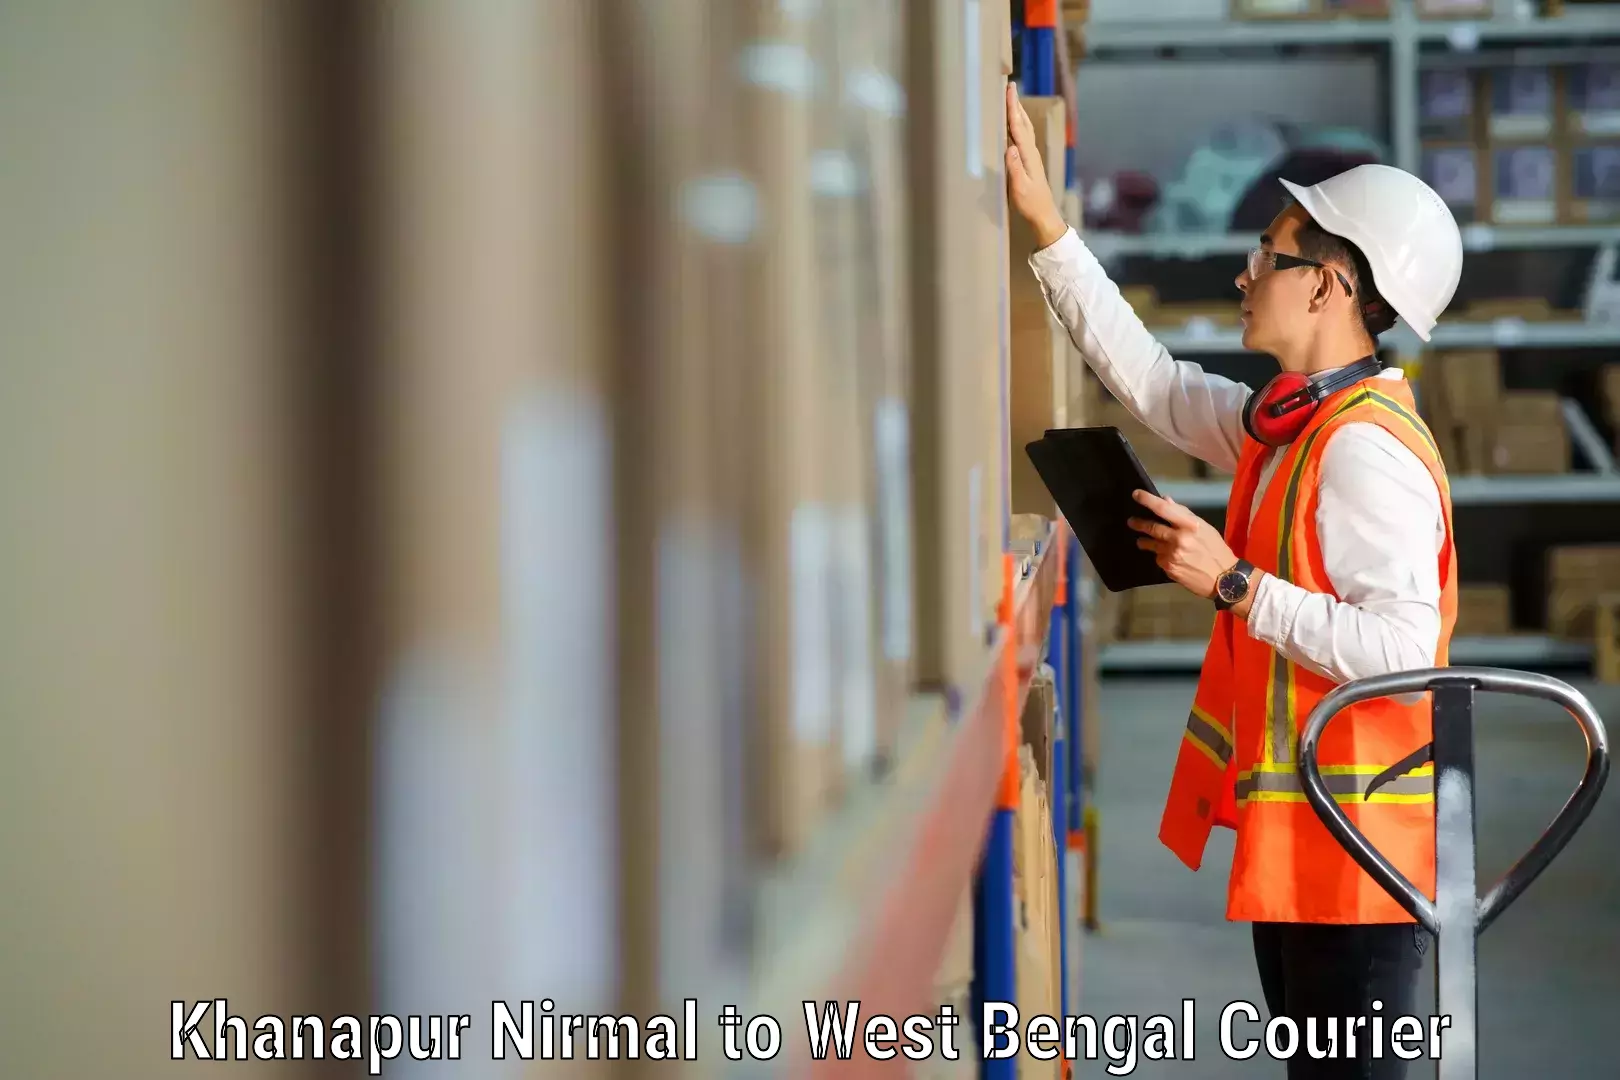 Quality relocation assistance Khanapur Nirmal to Ennore